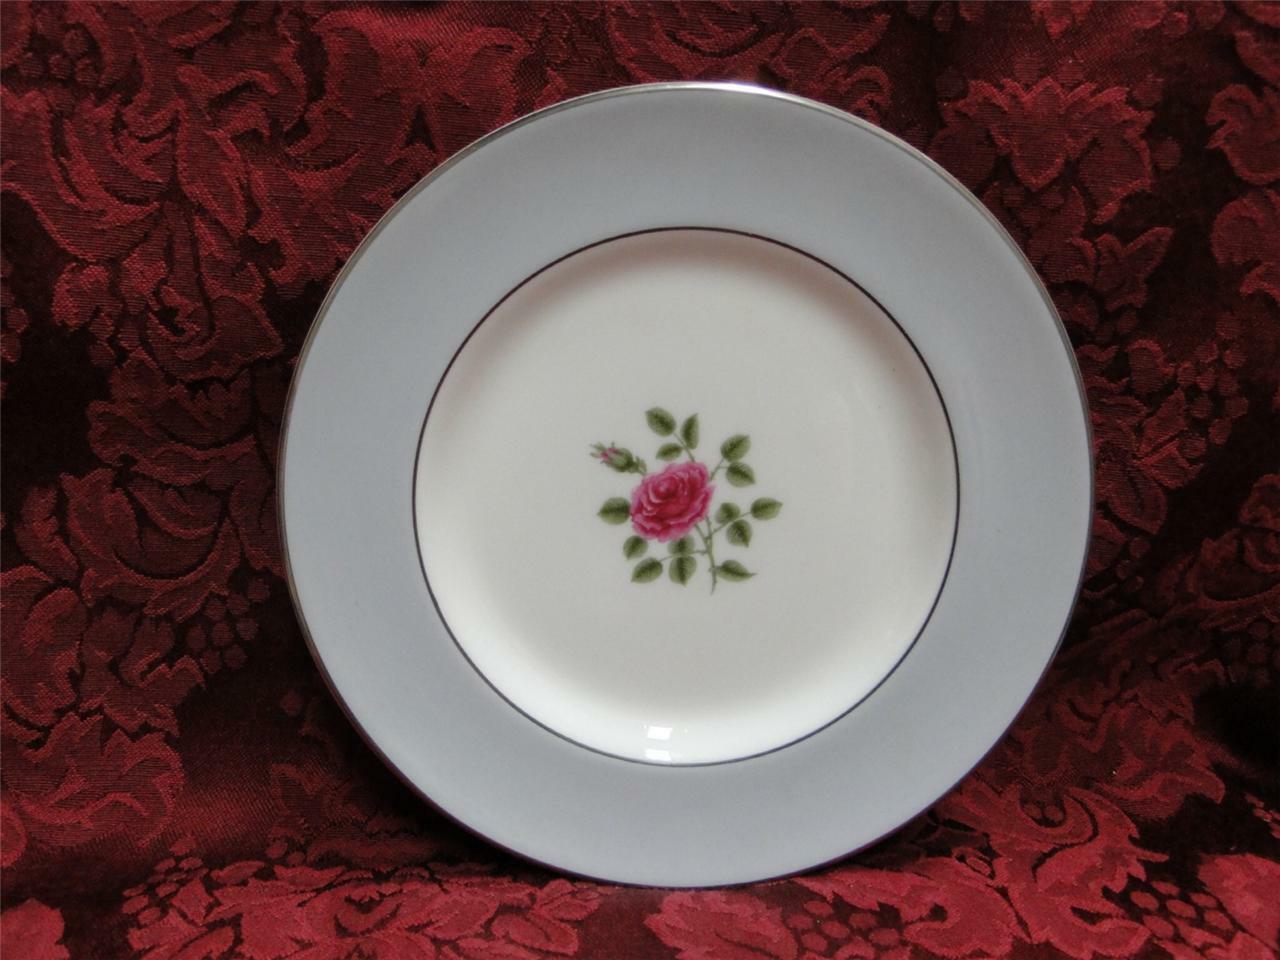 Royal Doulton Chateau Rose, Rose in Center, Gray Rim: Bread Plate (s), 6 1/2"